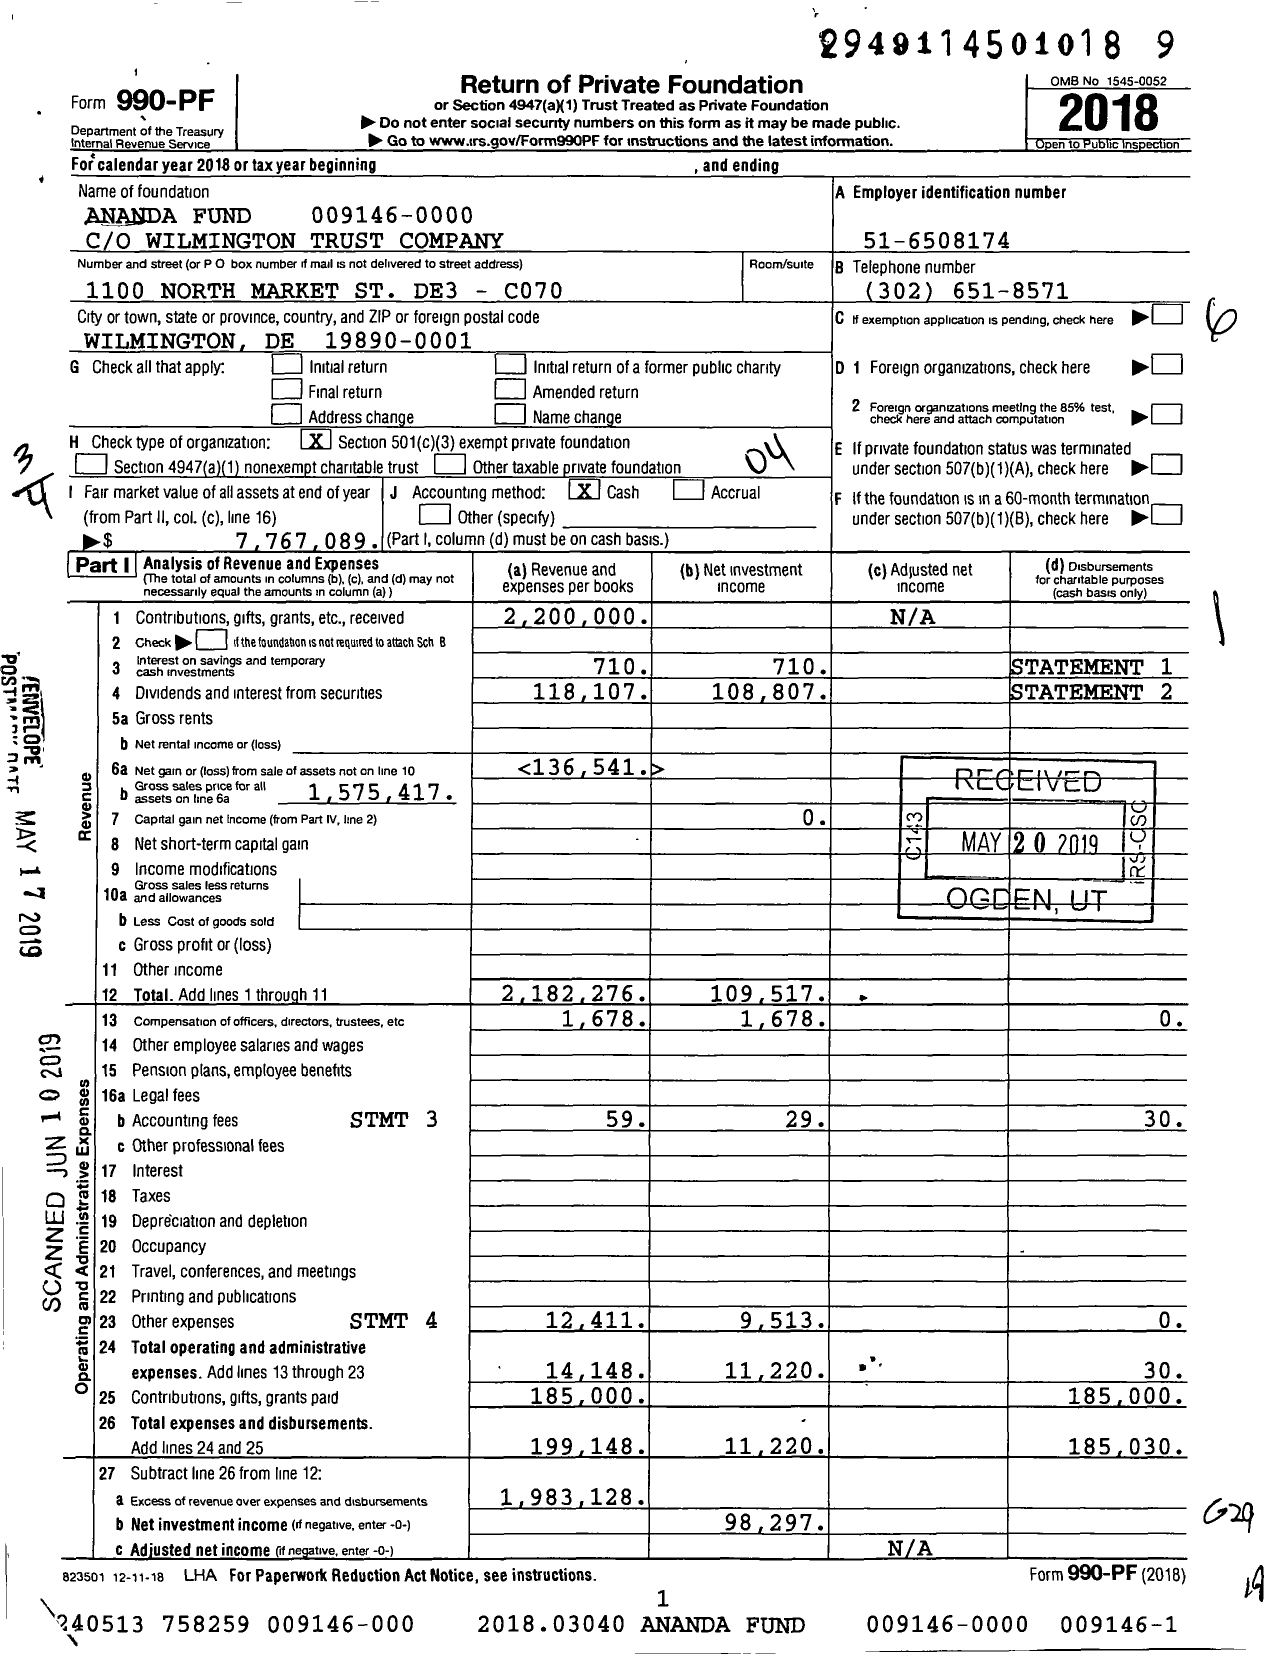 Image of first page of 2018 Form 990PF for Ananda Fund 009146-000